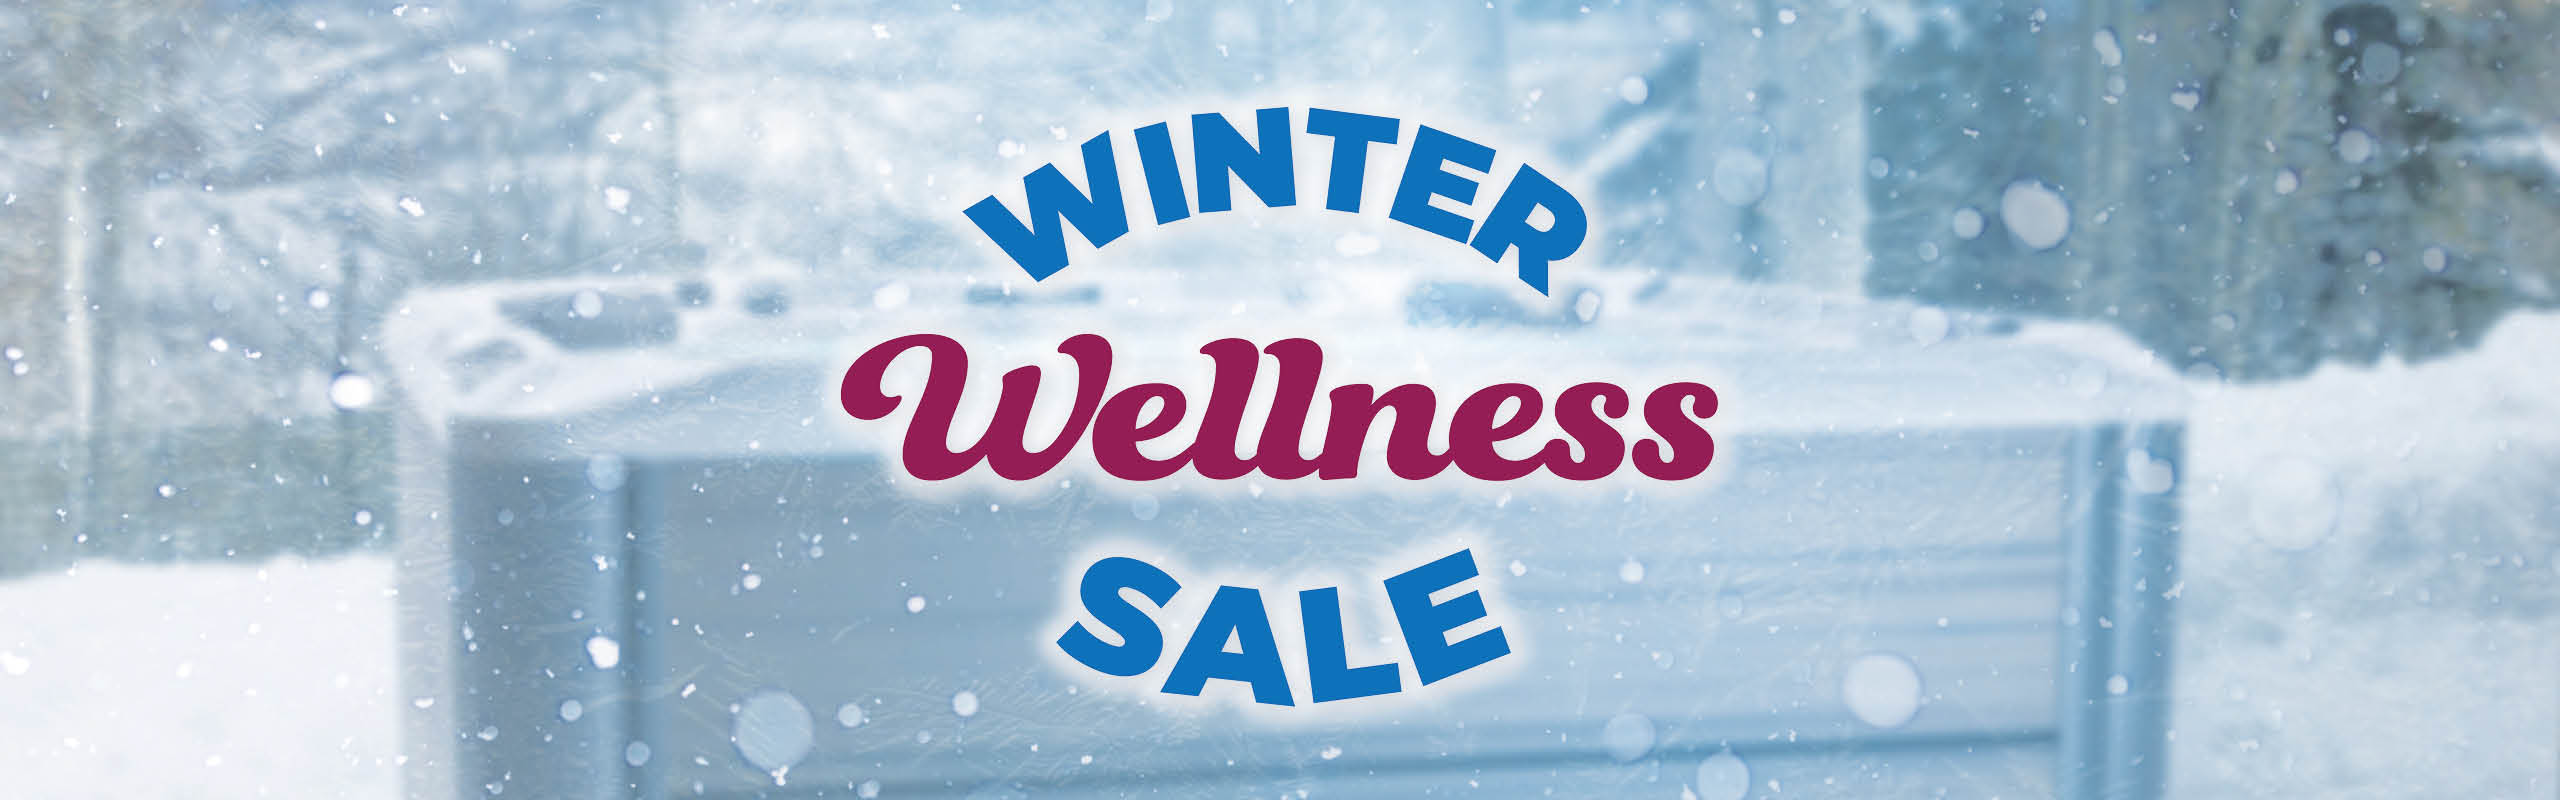 Winter Wellness Specials Page Banner